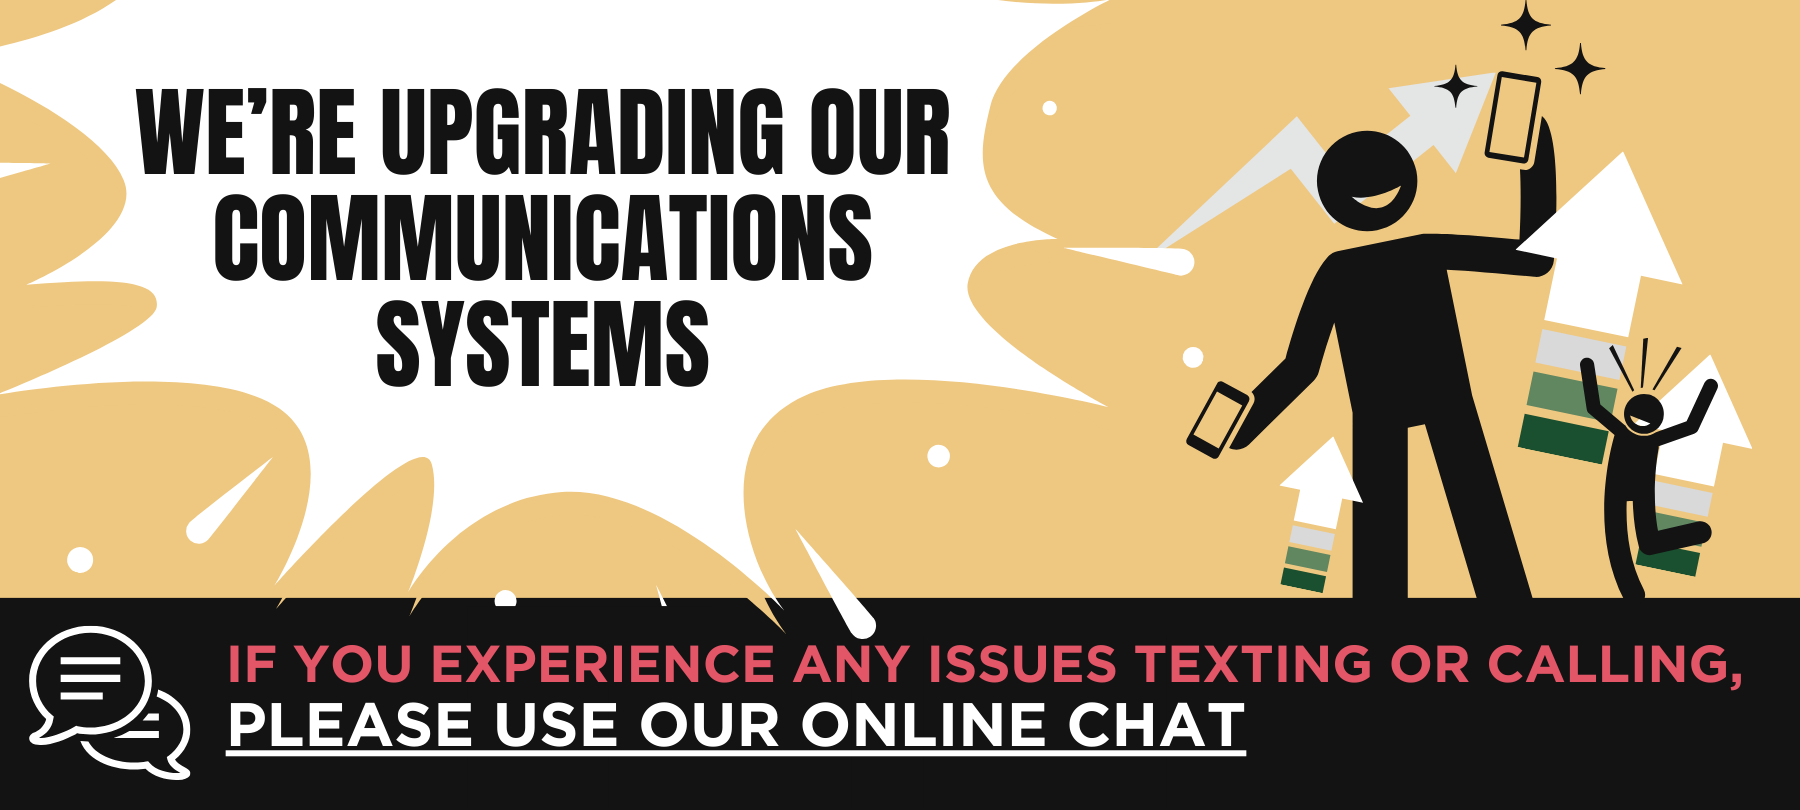 We're Upgrading Our Communications Systems. If you experience any issues texting or calling, please use our online chat to reach us.